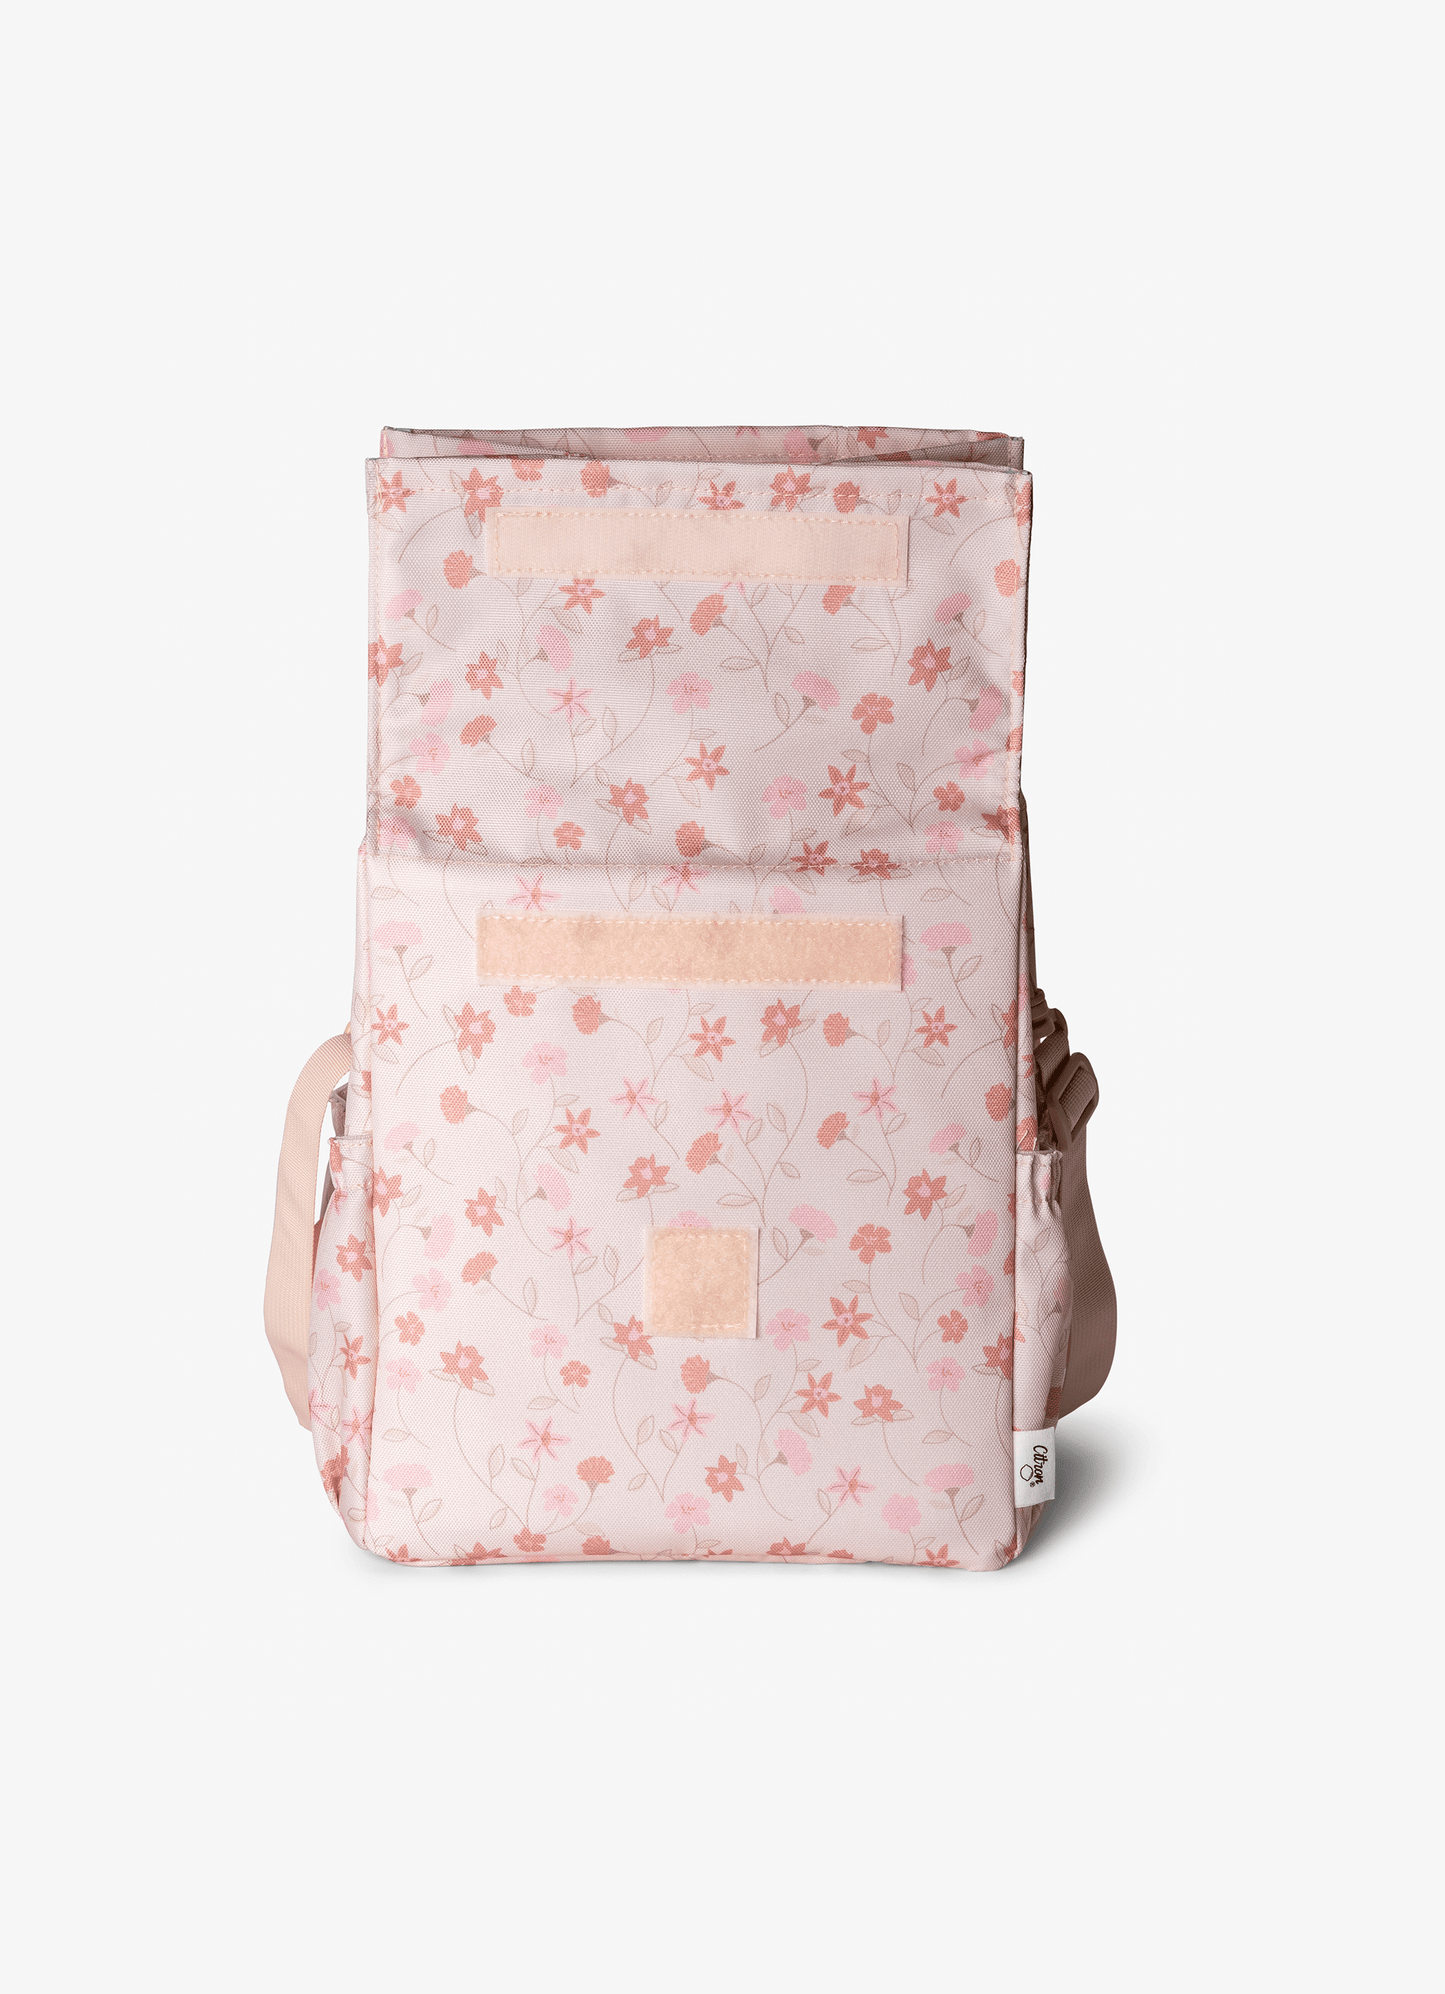 Thermal Roll-up Lunch Bag - Flowers